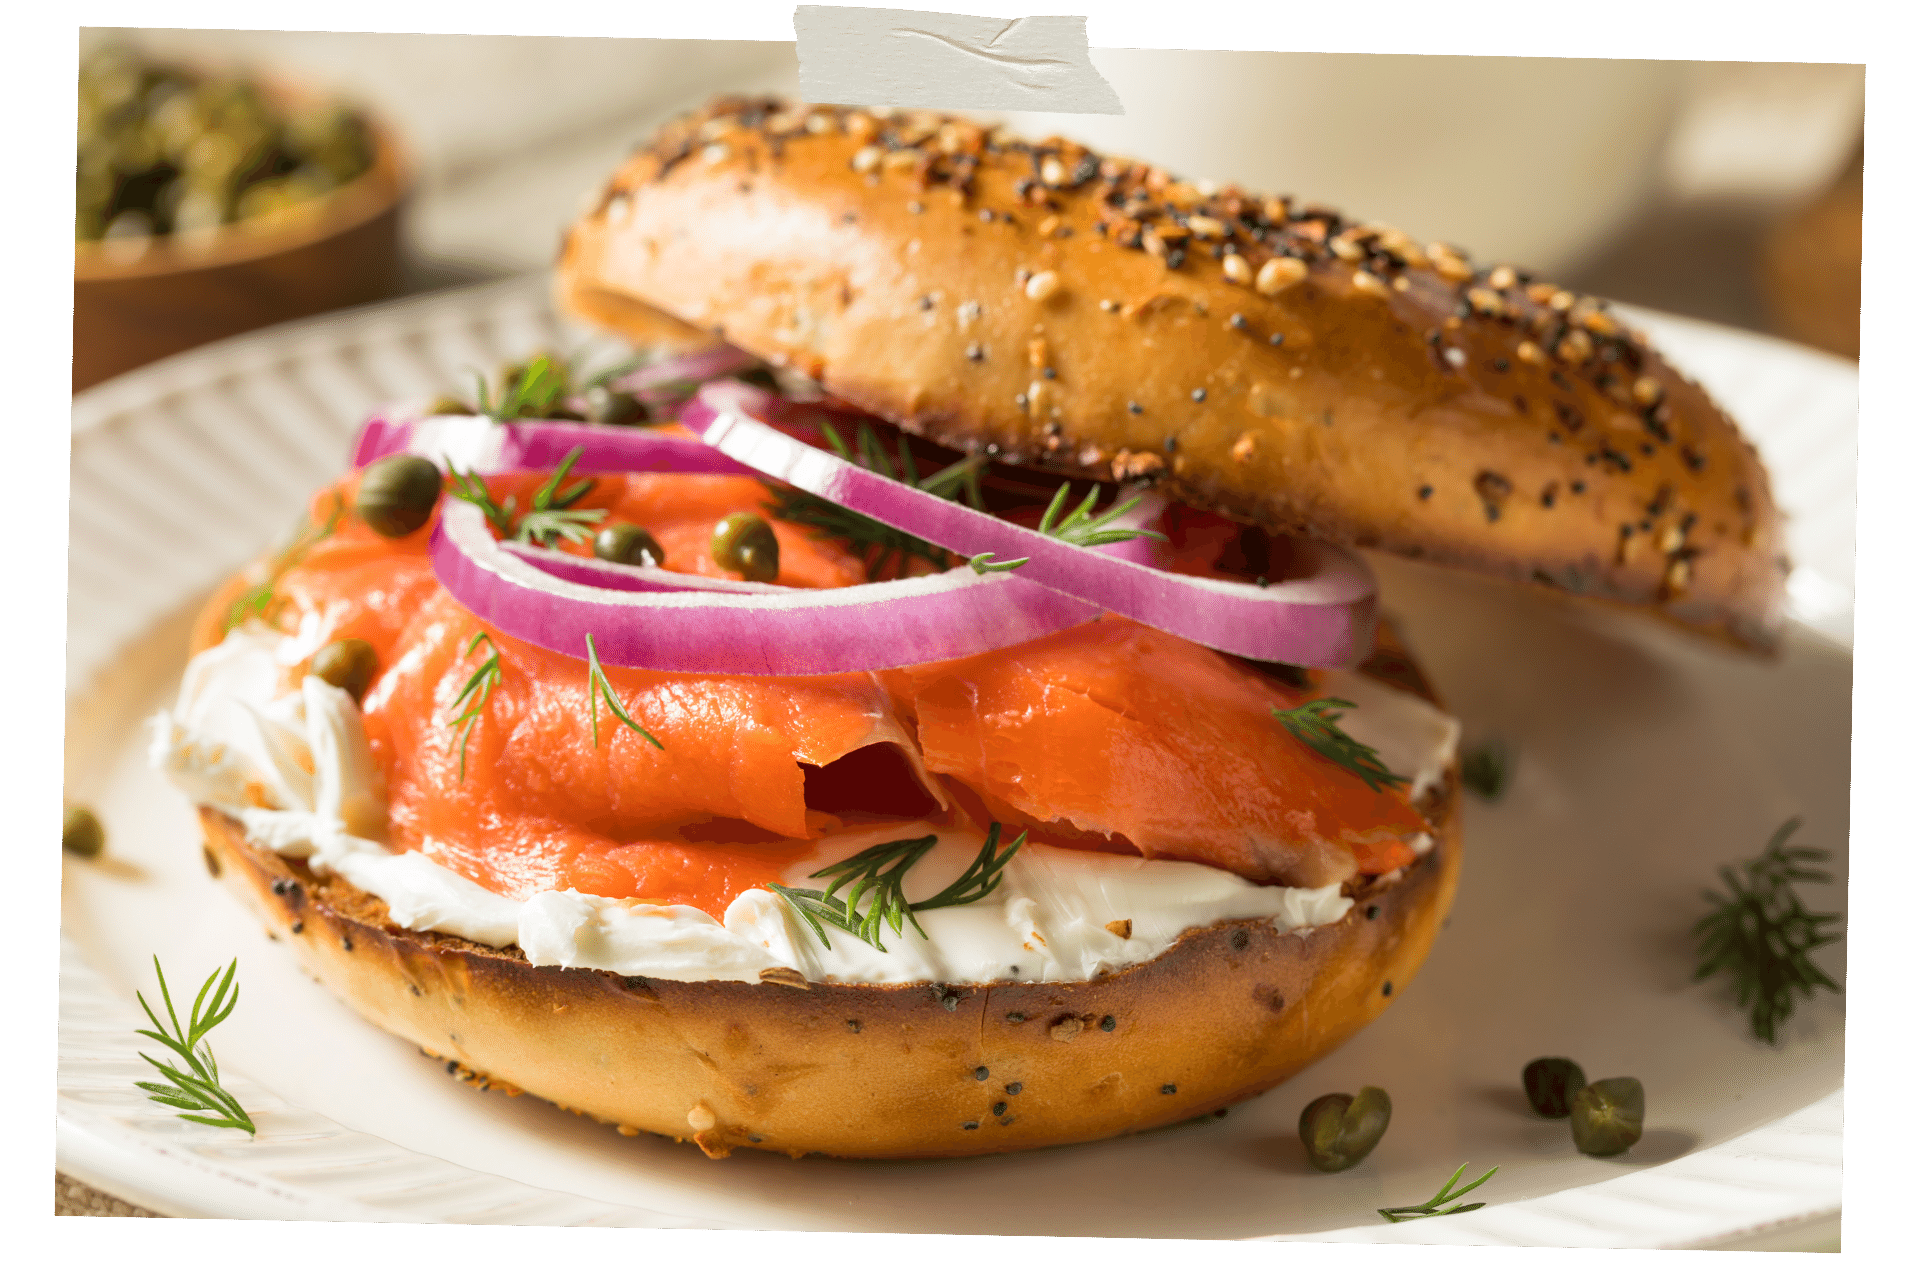 When it comes to New York for Foodies, a cream cheese bagel is a classic. Pictured is a bagel on a white plate, half open to reveal it's contents: cream cheese, salmon, and onions.